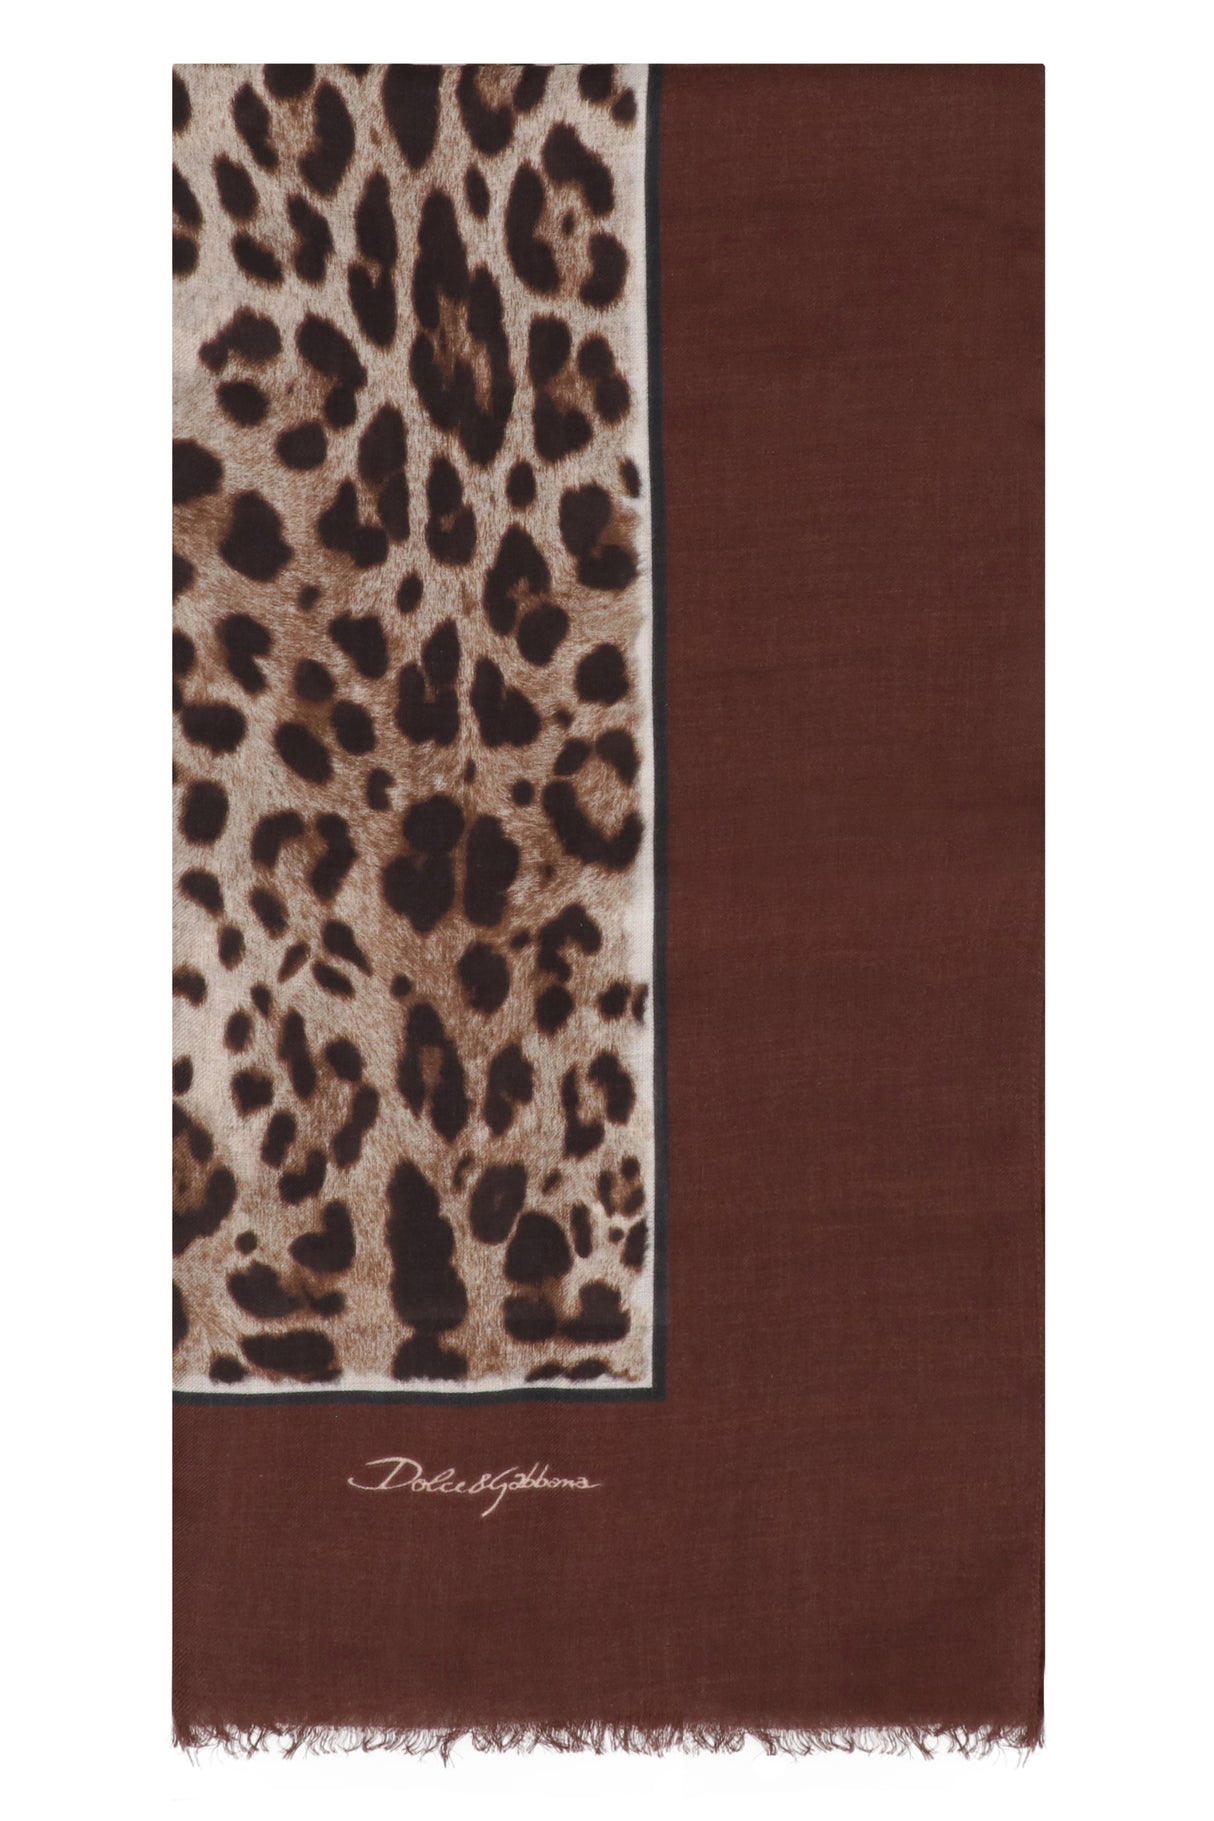 Leopard Print Modal and Cashmere Blend Scarf - Size 135 x 200 CM